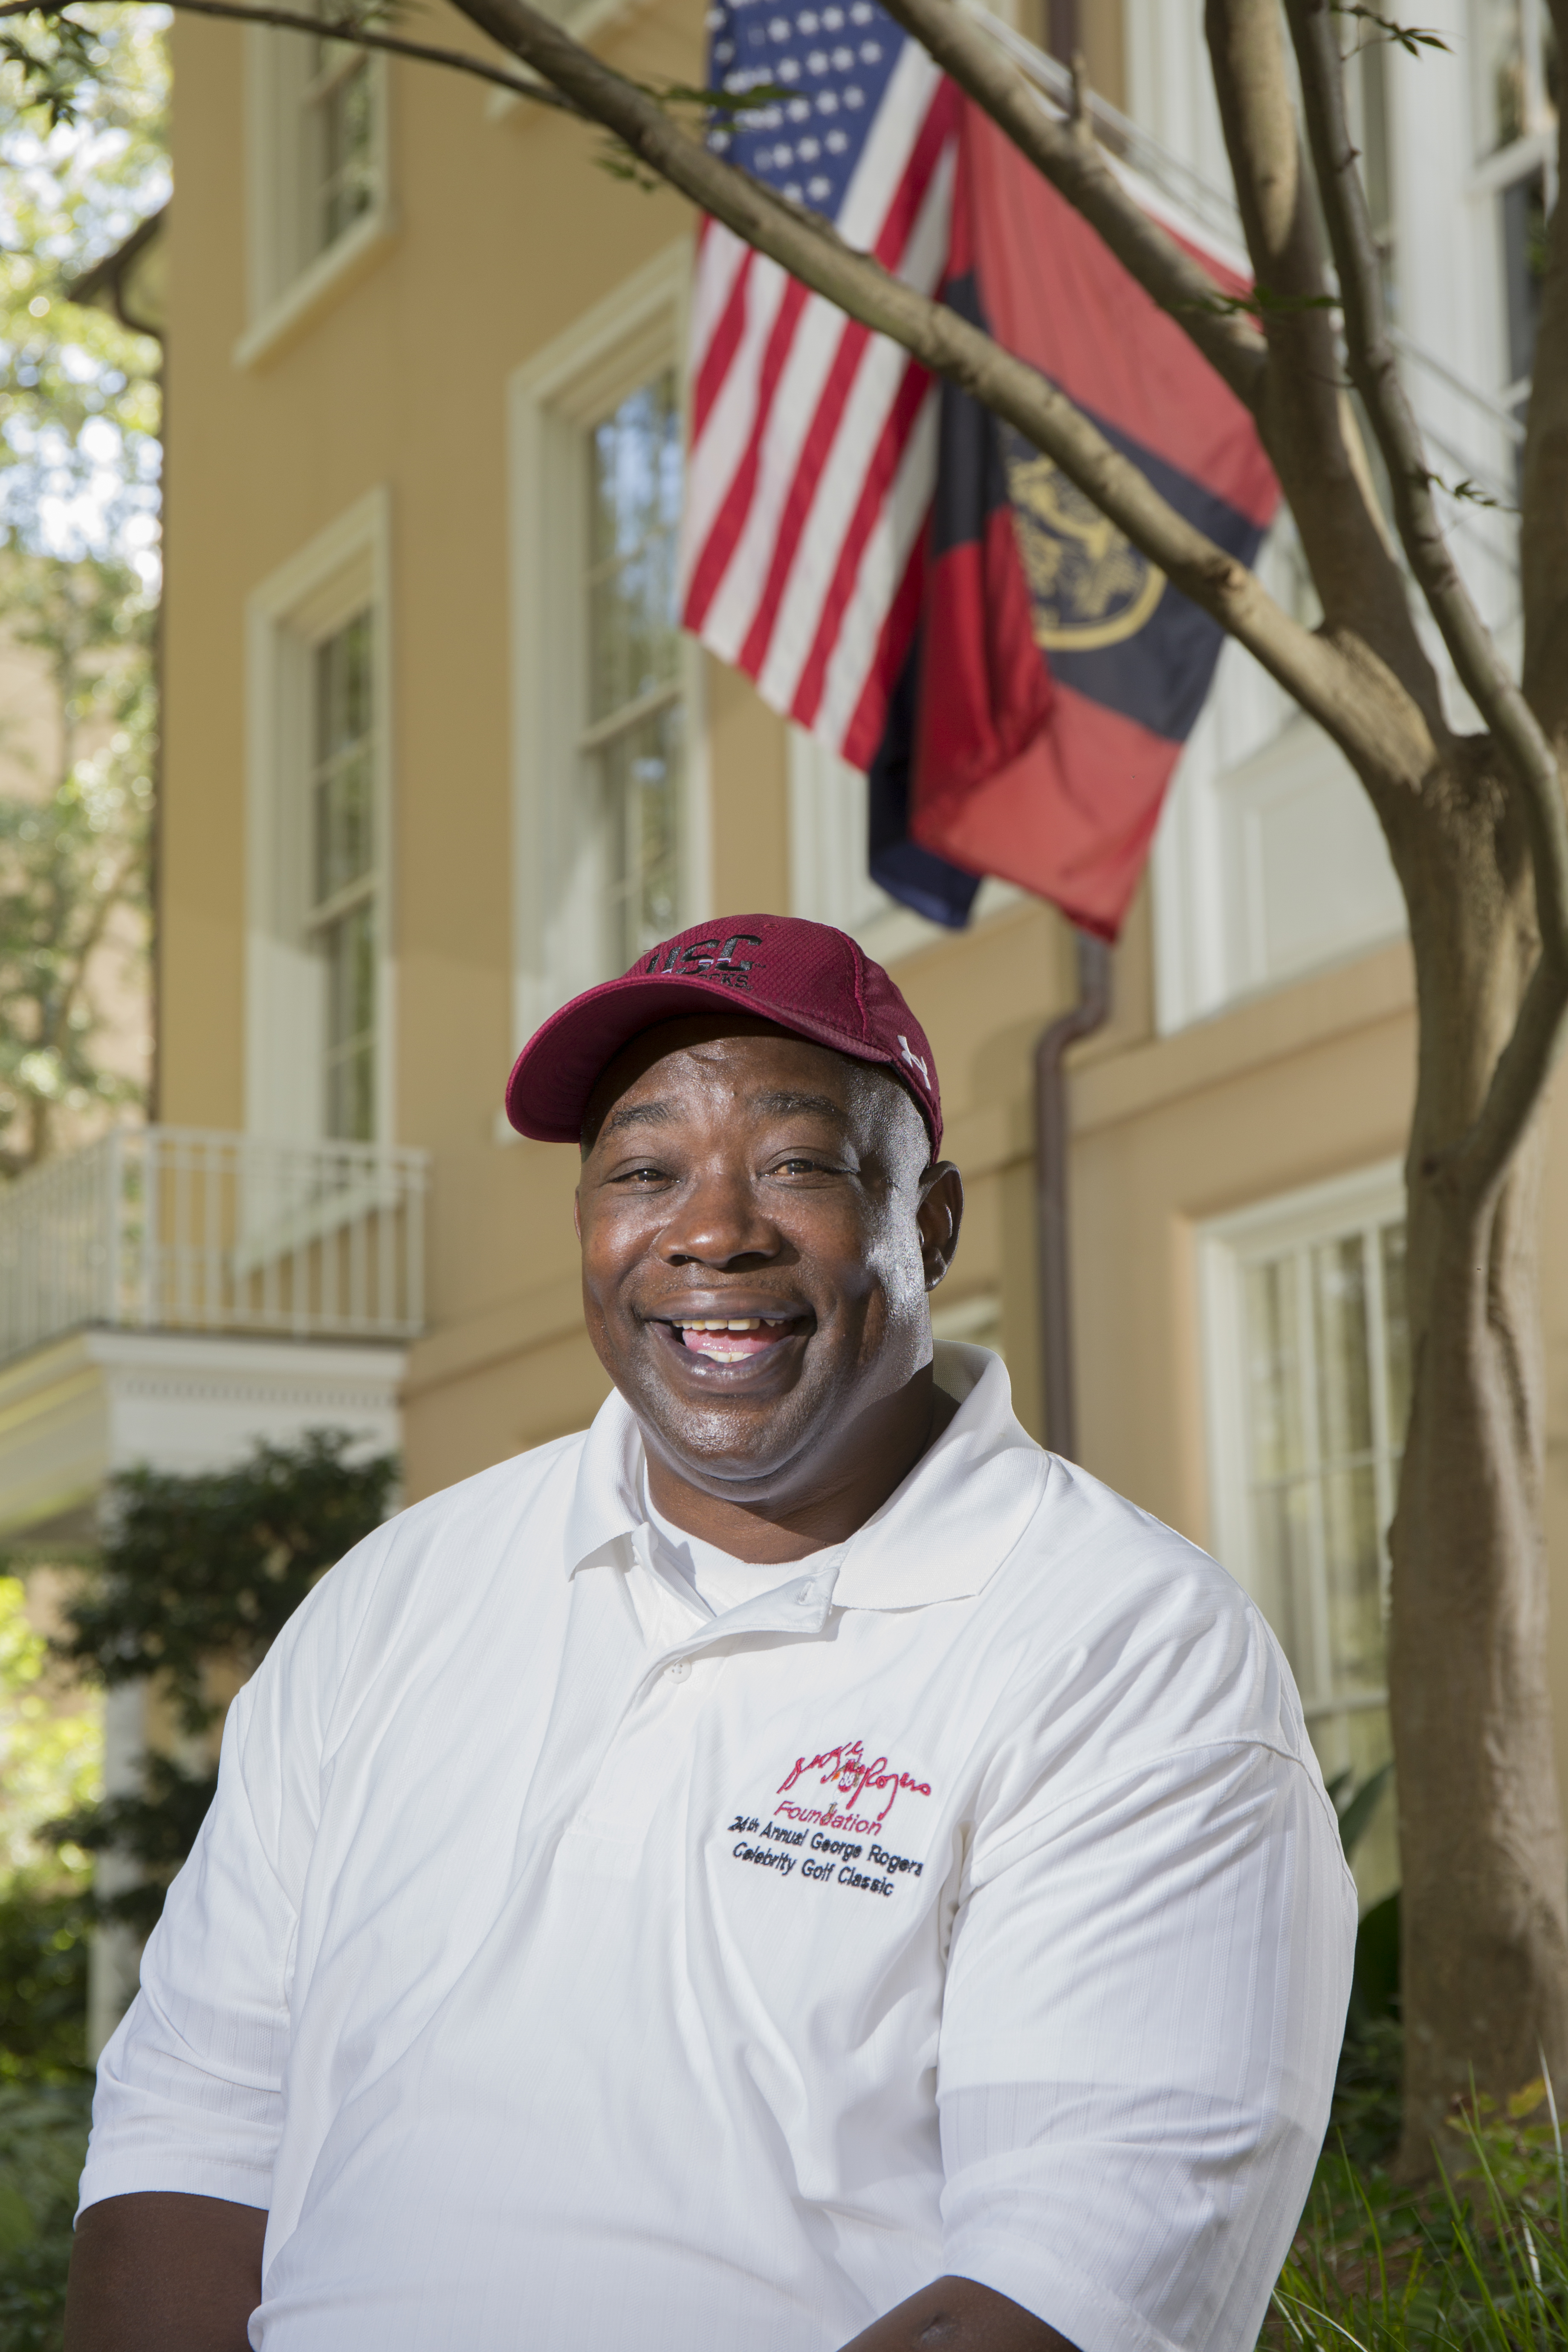 All-American running back and Duluth, Georgia, native George Rogers officially retired from football in 1988 at 29. He returned to Columbia to work for the University of South Carolina mentoring NFL hopefuls. Encouraging students not to neglect their education, he created the George Rogers Foundation of the Carolinas to help first-generation college students attain scholarships. Photography by Jeff Amberg